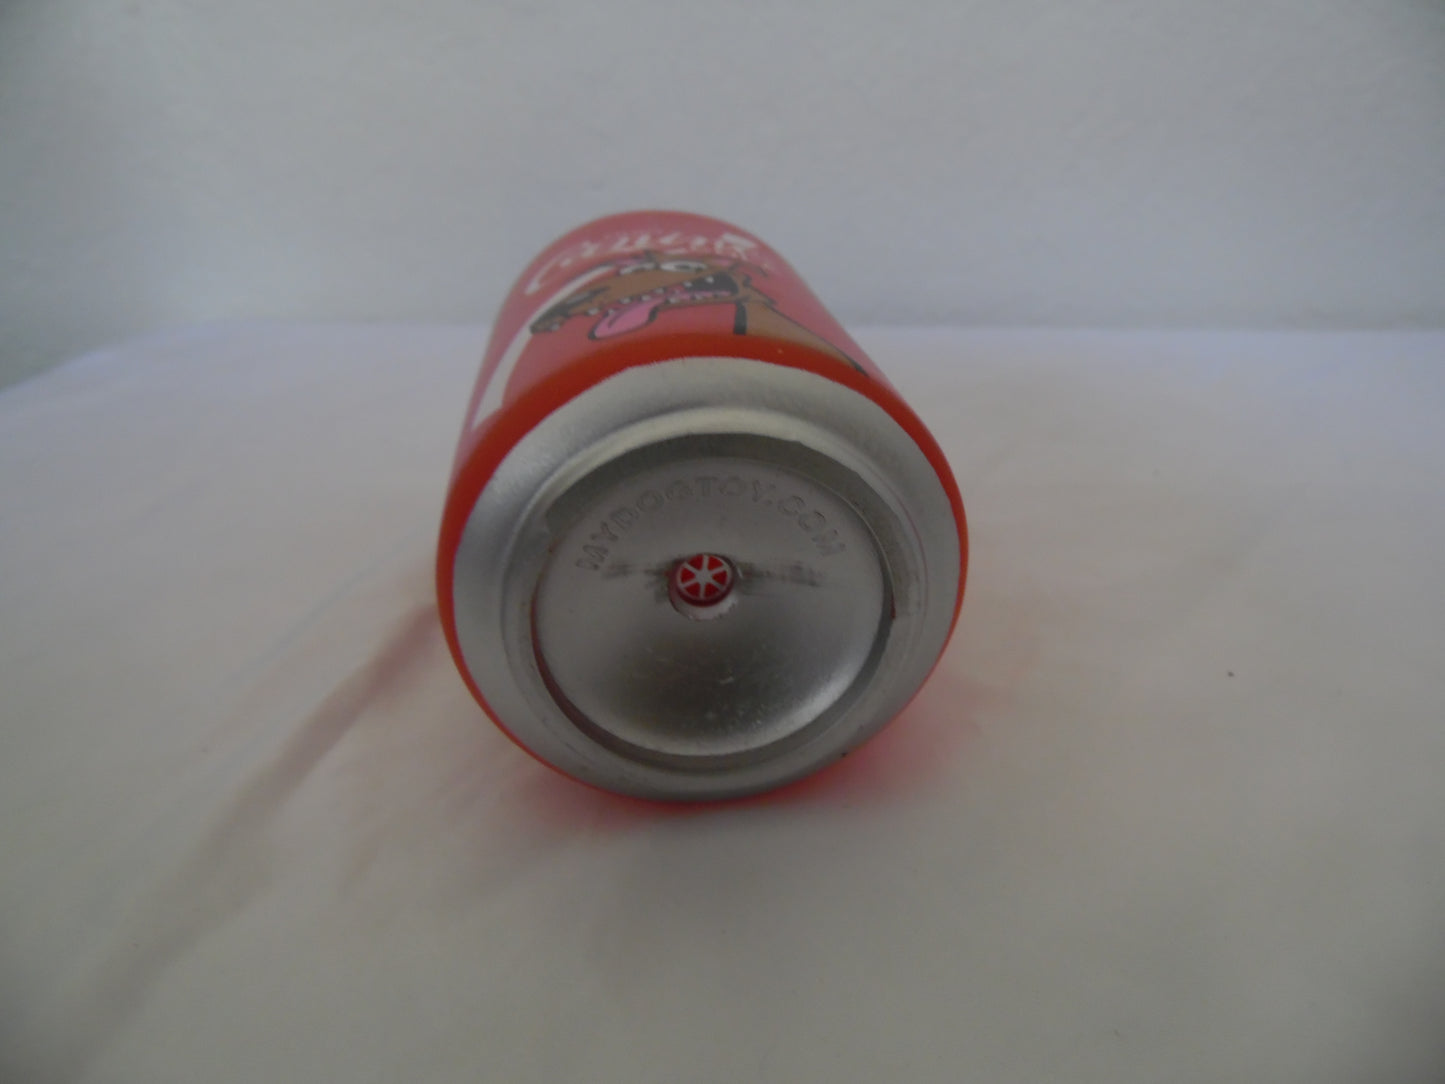 Silly Squeaky Soda Can Dog Toy 100% Vinyl. Made Durable & Strong. Novelty Play Toy &Floats (Canine Cola)